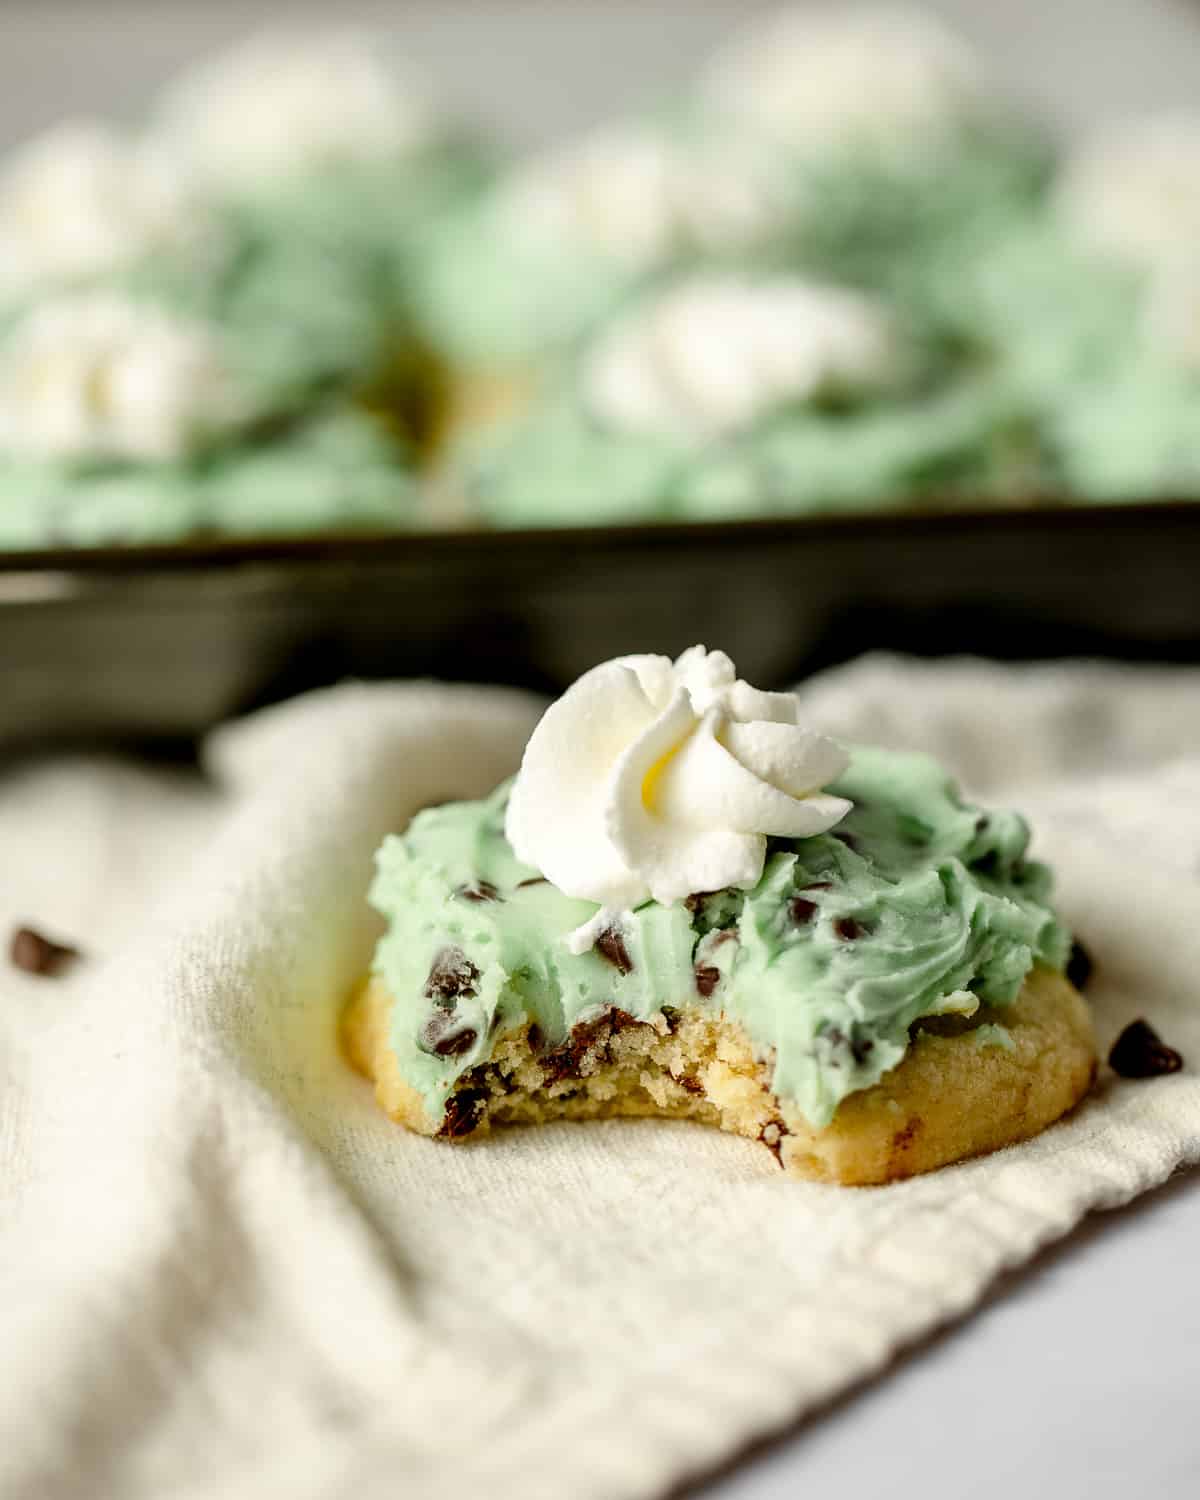 A chocolate chip sugar cookie frosted with mint green chocolate chip frosting and a rosette of whipped cream with a bite removed.